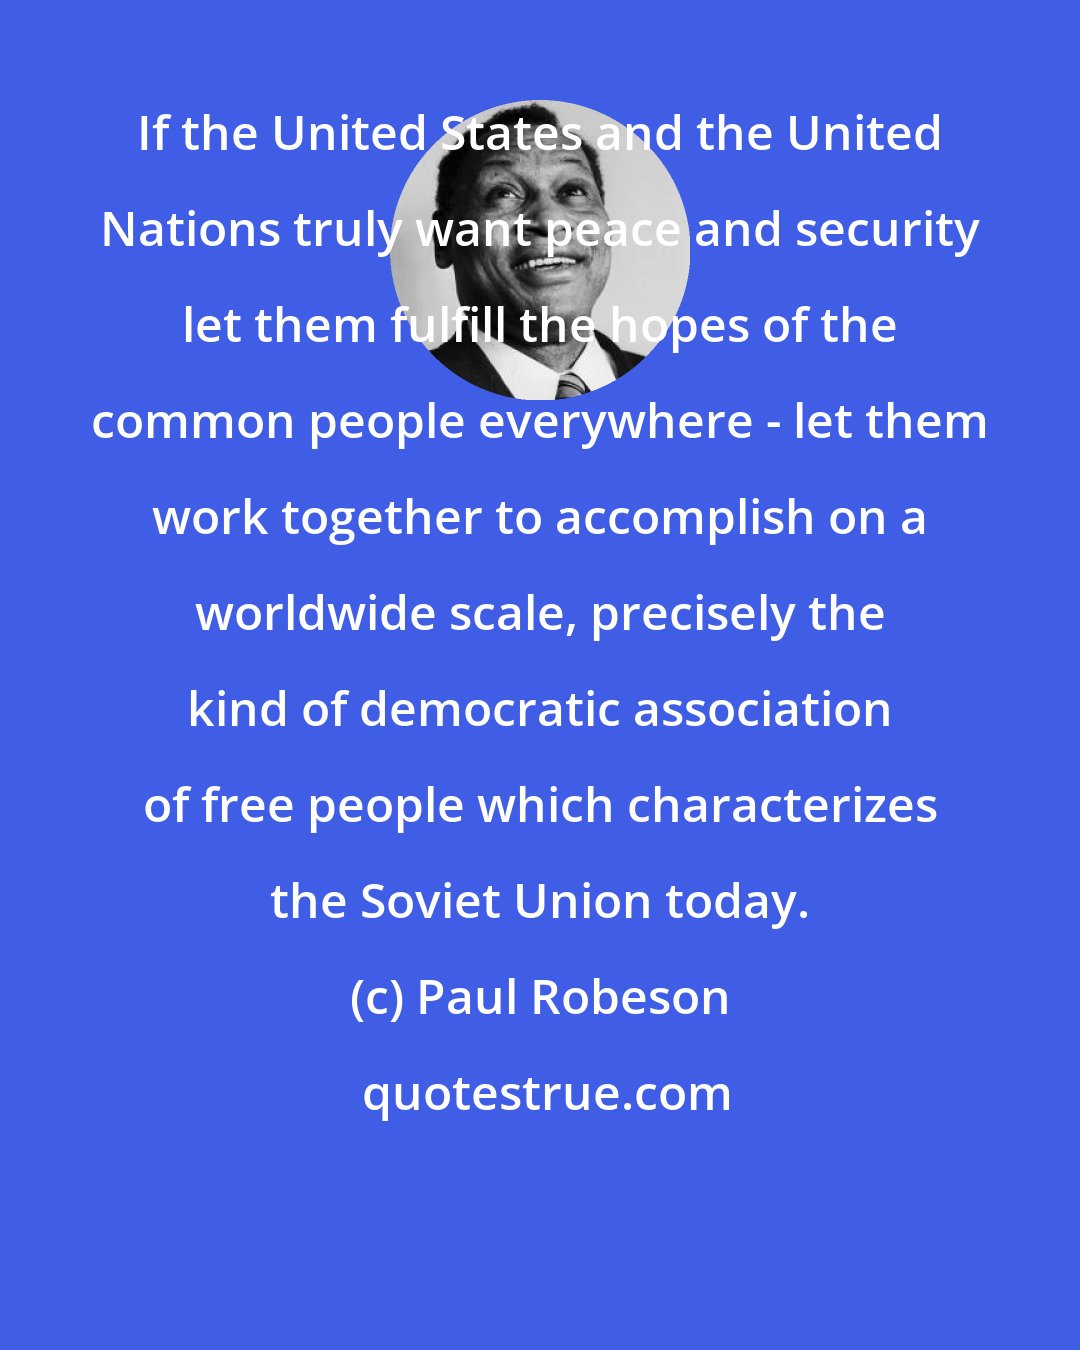 Paul Robeson: If the United States and the United Nations truly want peace and security let them fulfill the hopes of the common people everywhere - let them work together to accomplish on a worldwide scale, precisely the kind of democratic association of free people which characterizes the Soviet Union today.